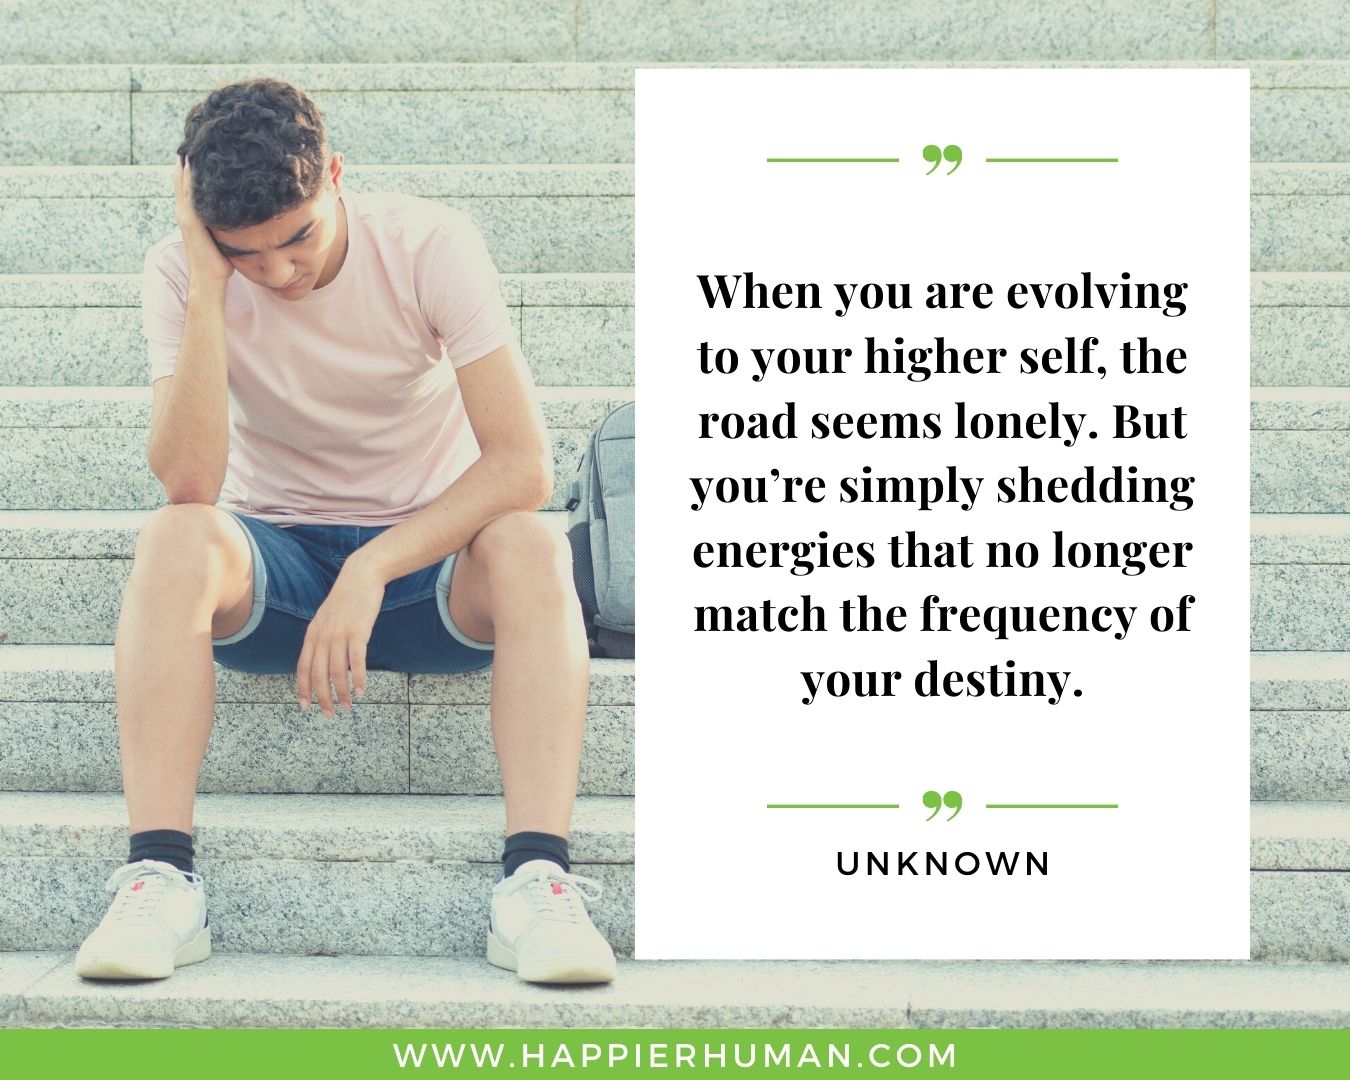 Loneliness Quotes - “When you are evolving to your higher self, the road seems lonely. But you’re simply shedding energies that no longer match the frequency of your destiny.” – Unknown